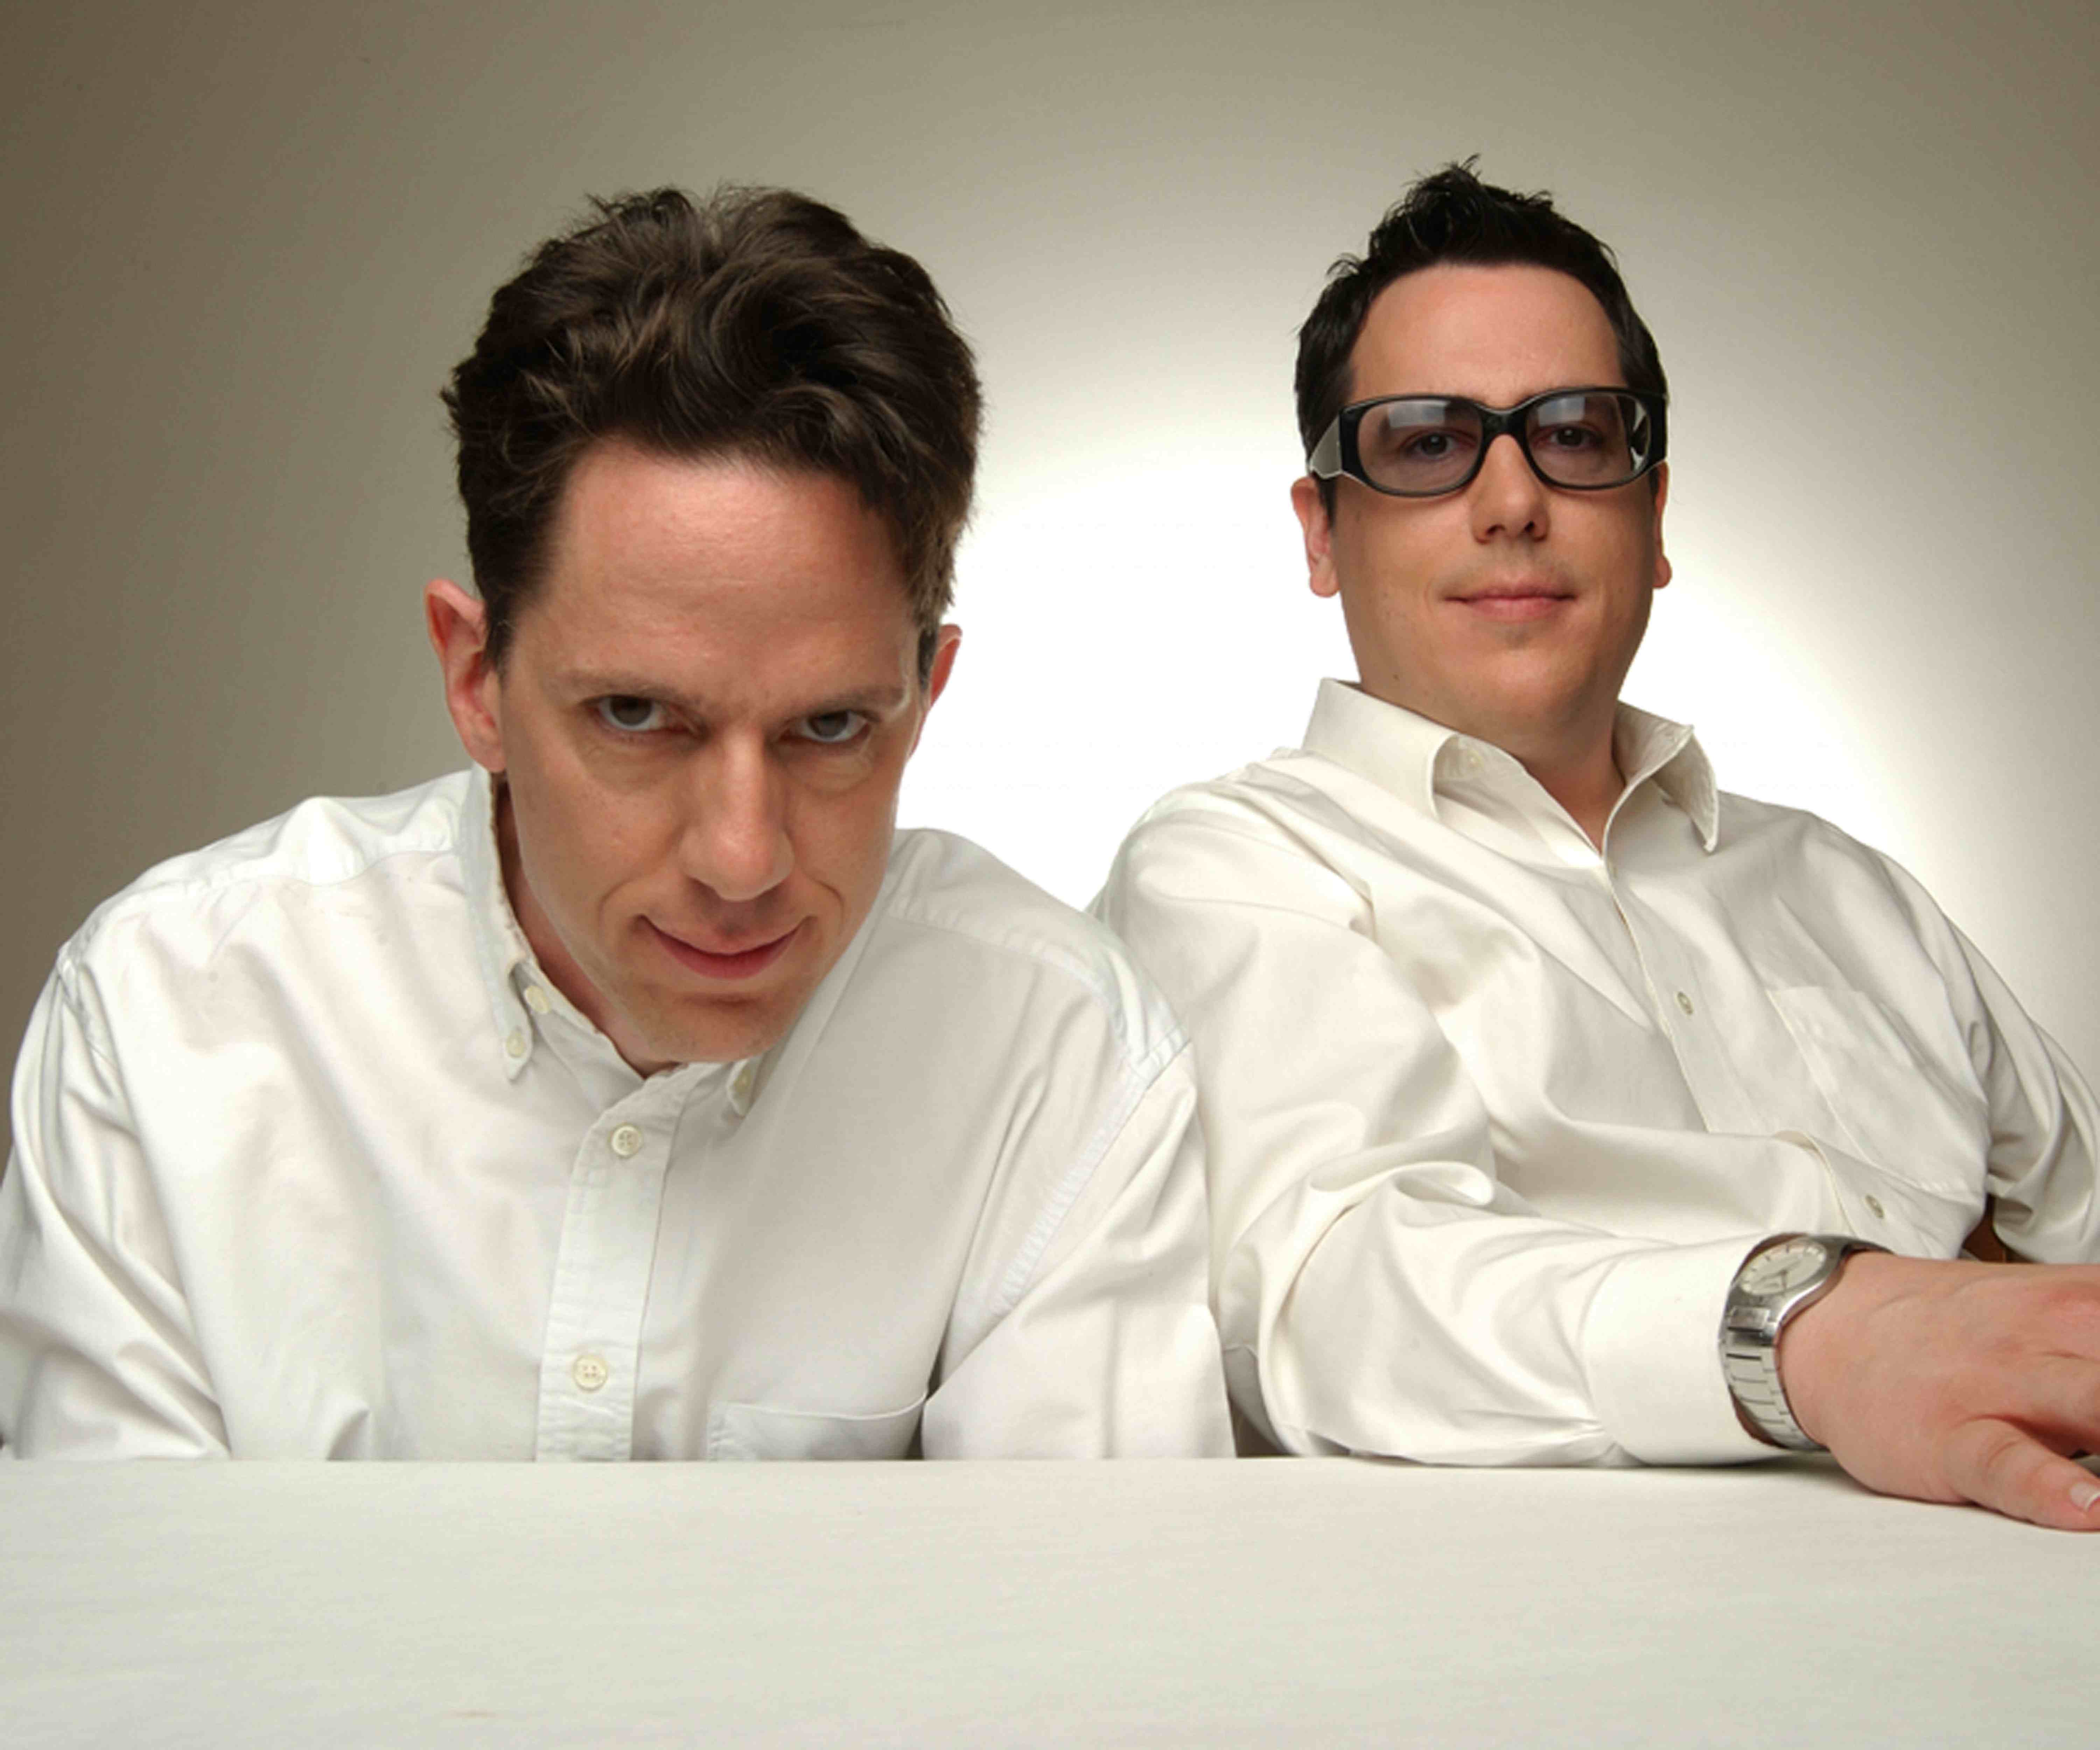 They Might Be Giants wallpapers, Music, HQ They Might Be Giants